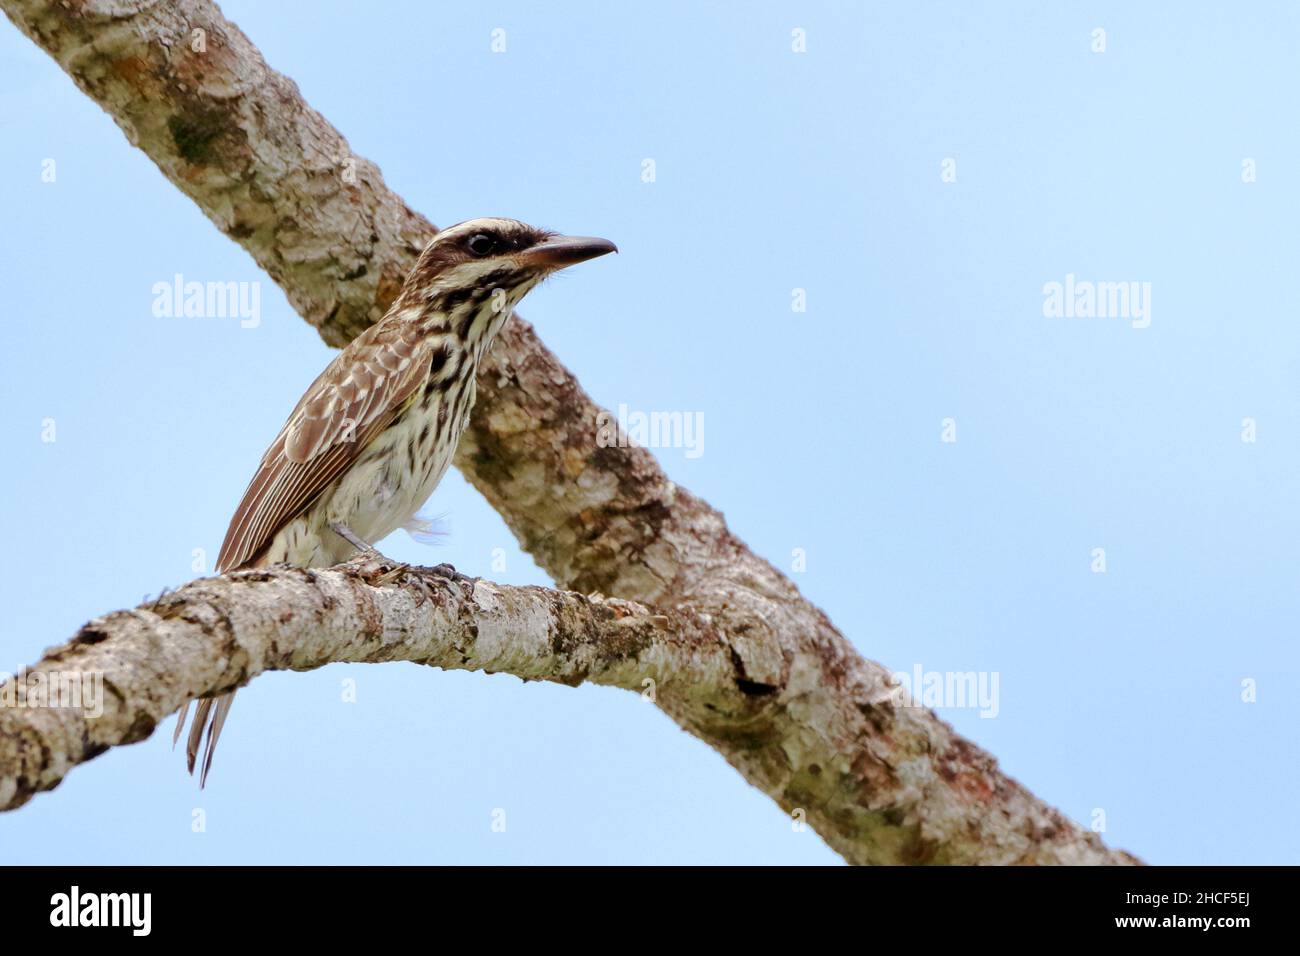 Streaked Flycatcher (Myiodynastes maculatus) perched on a branch above the blue sky. Stock Photo